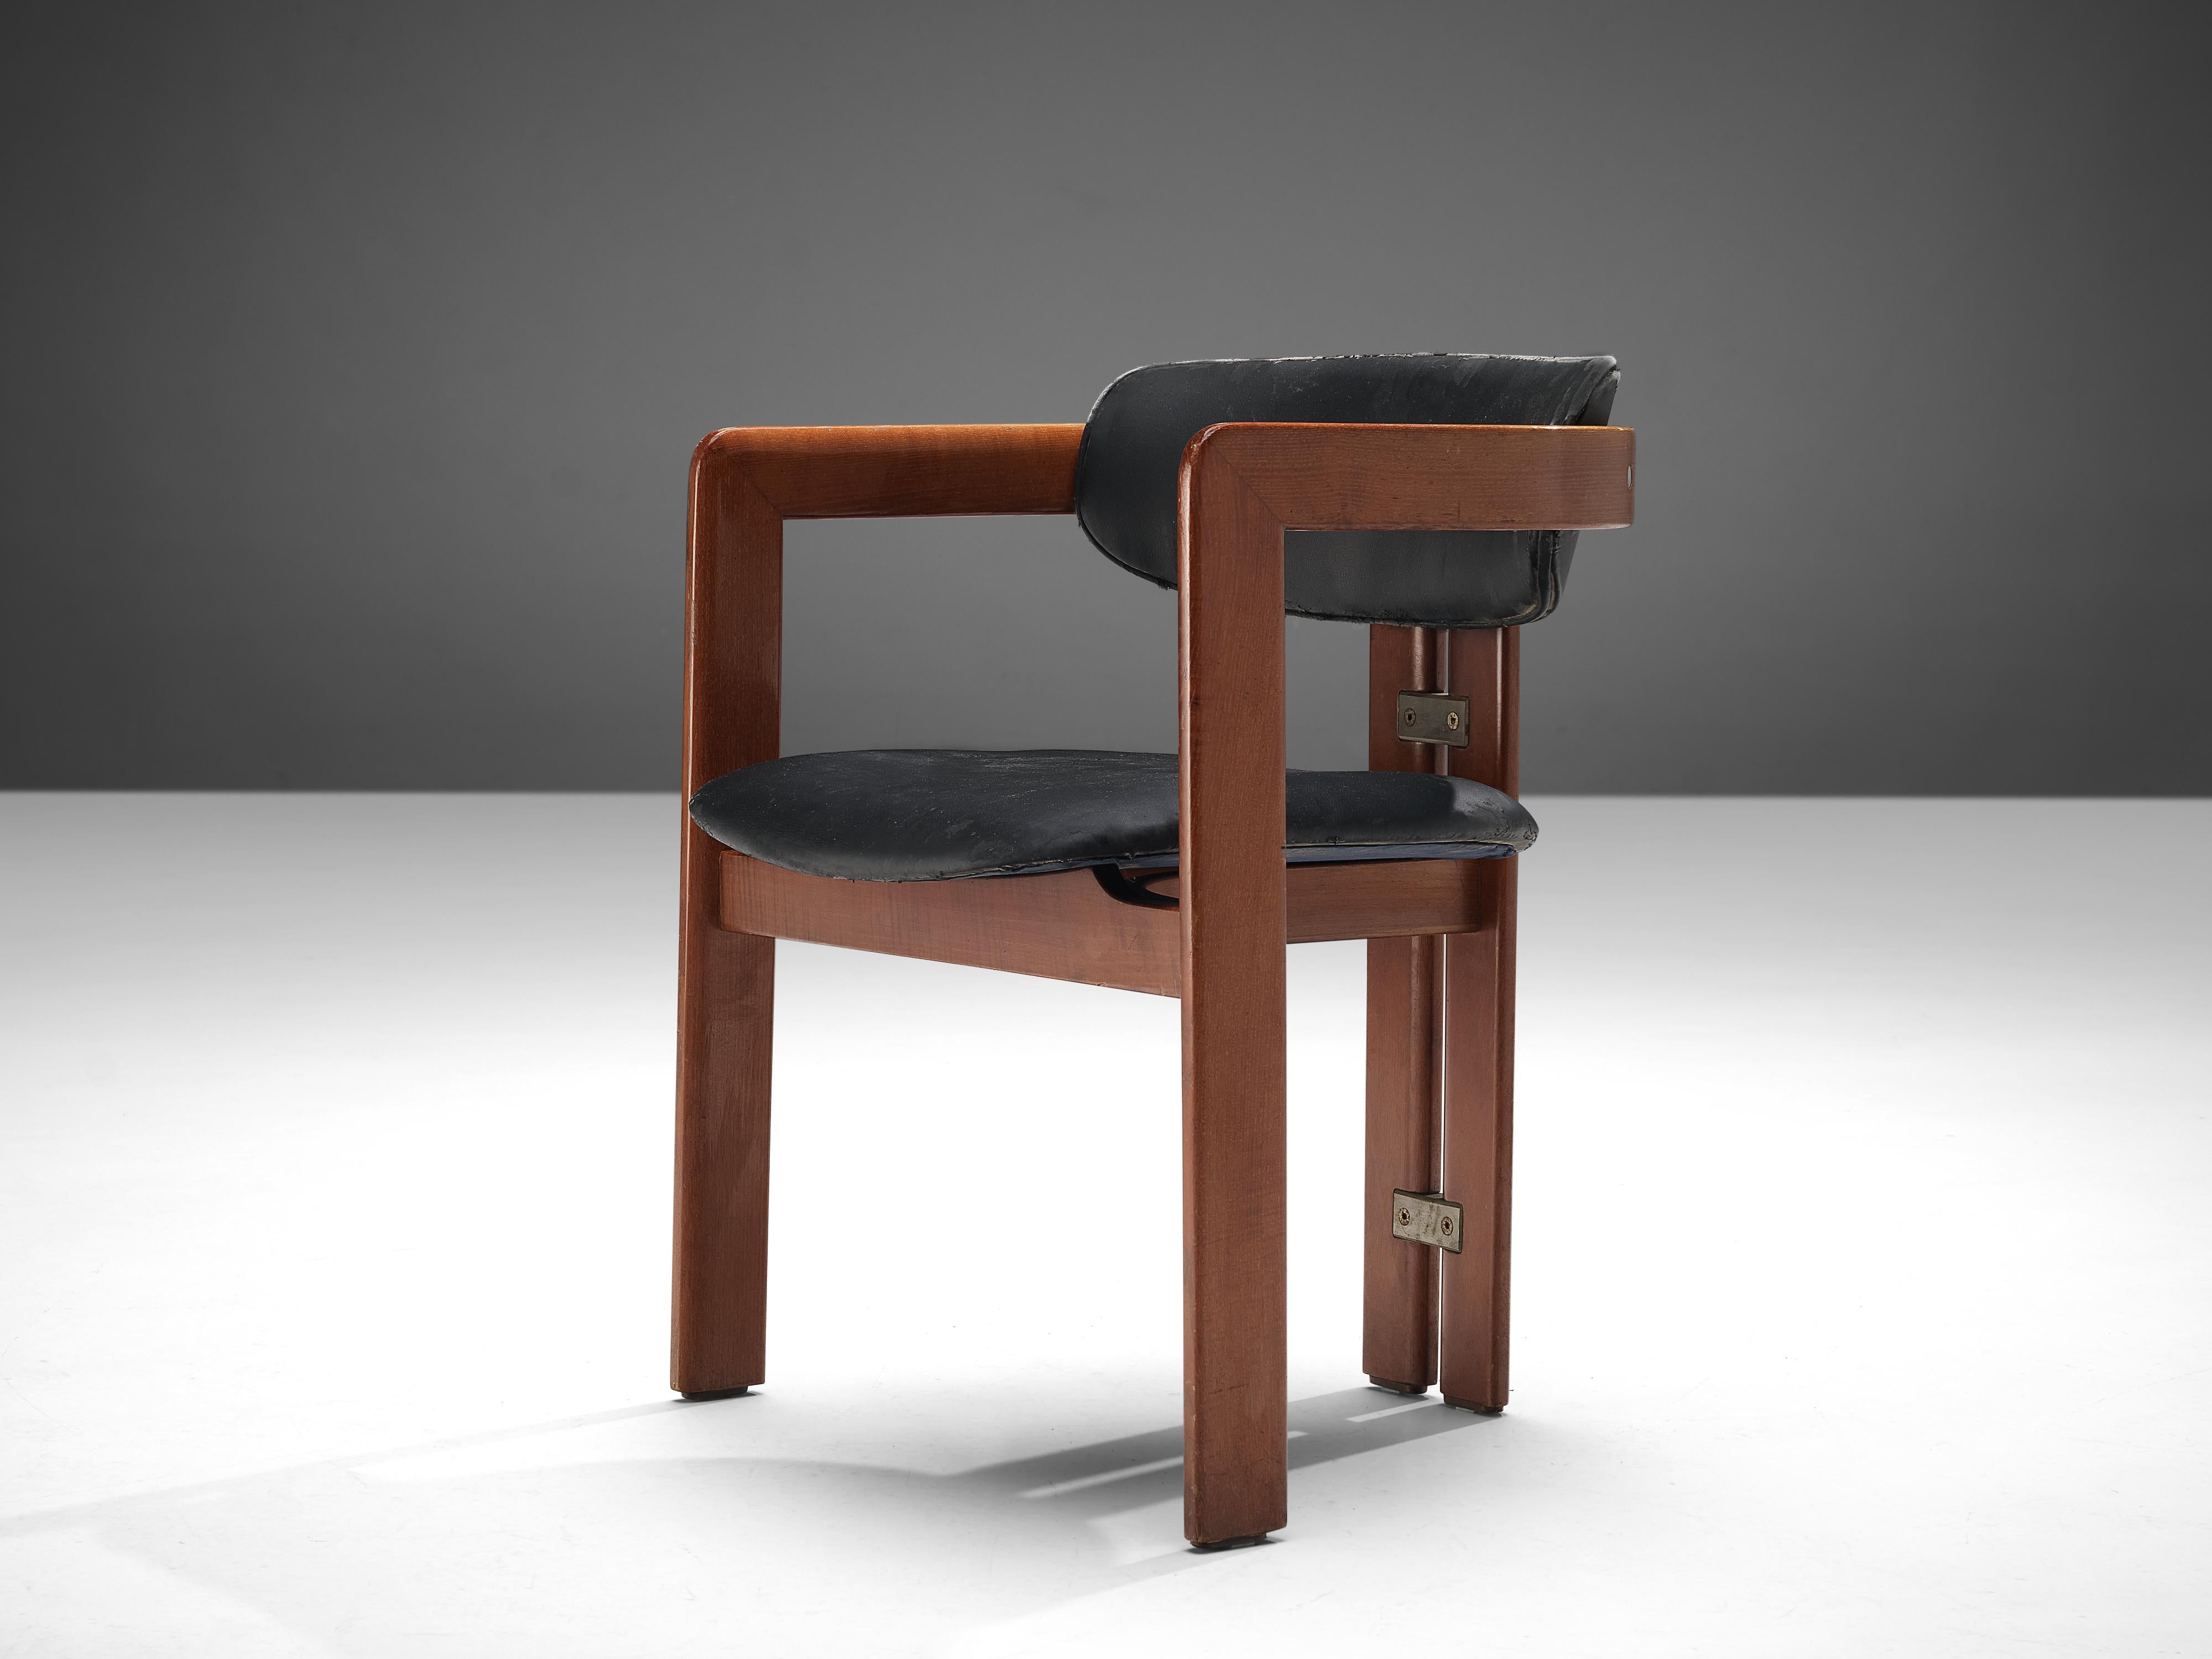 Augusto Savini for Pozzi, dining chairs model 'Pamplona', wood, upholstery, aluminum, Italy, designed in 1965 

'Pamplona' armchairs in ash and dark upholstery. A characteristic design; simplistic yet very strong in lines and proportions.